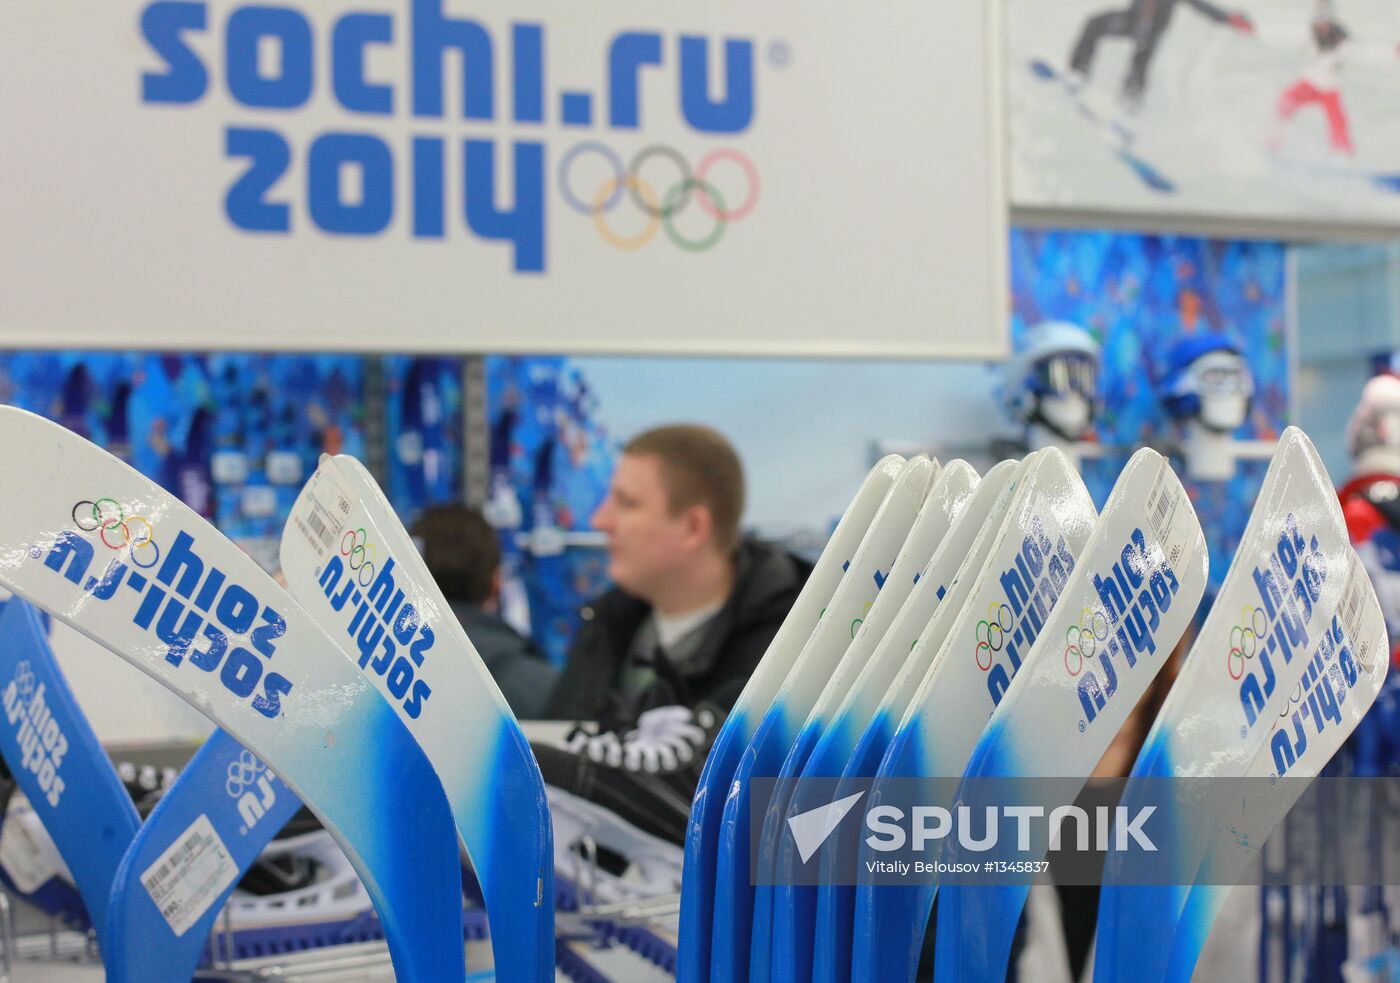 Sale of goods marked with Olympic symbols in Moscow